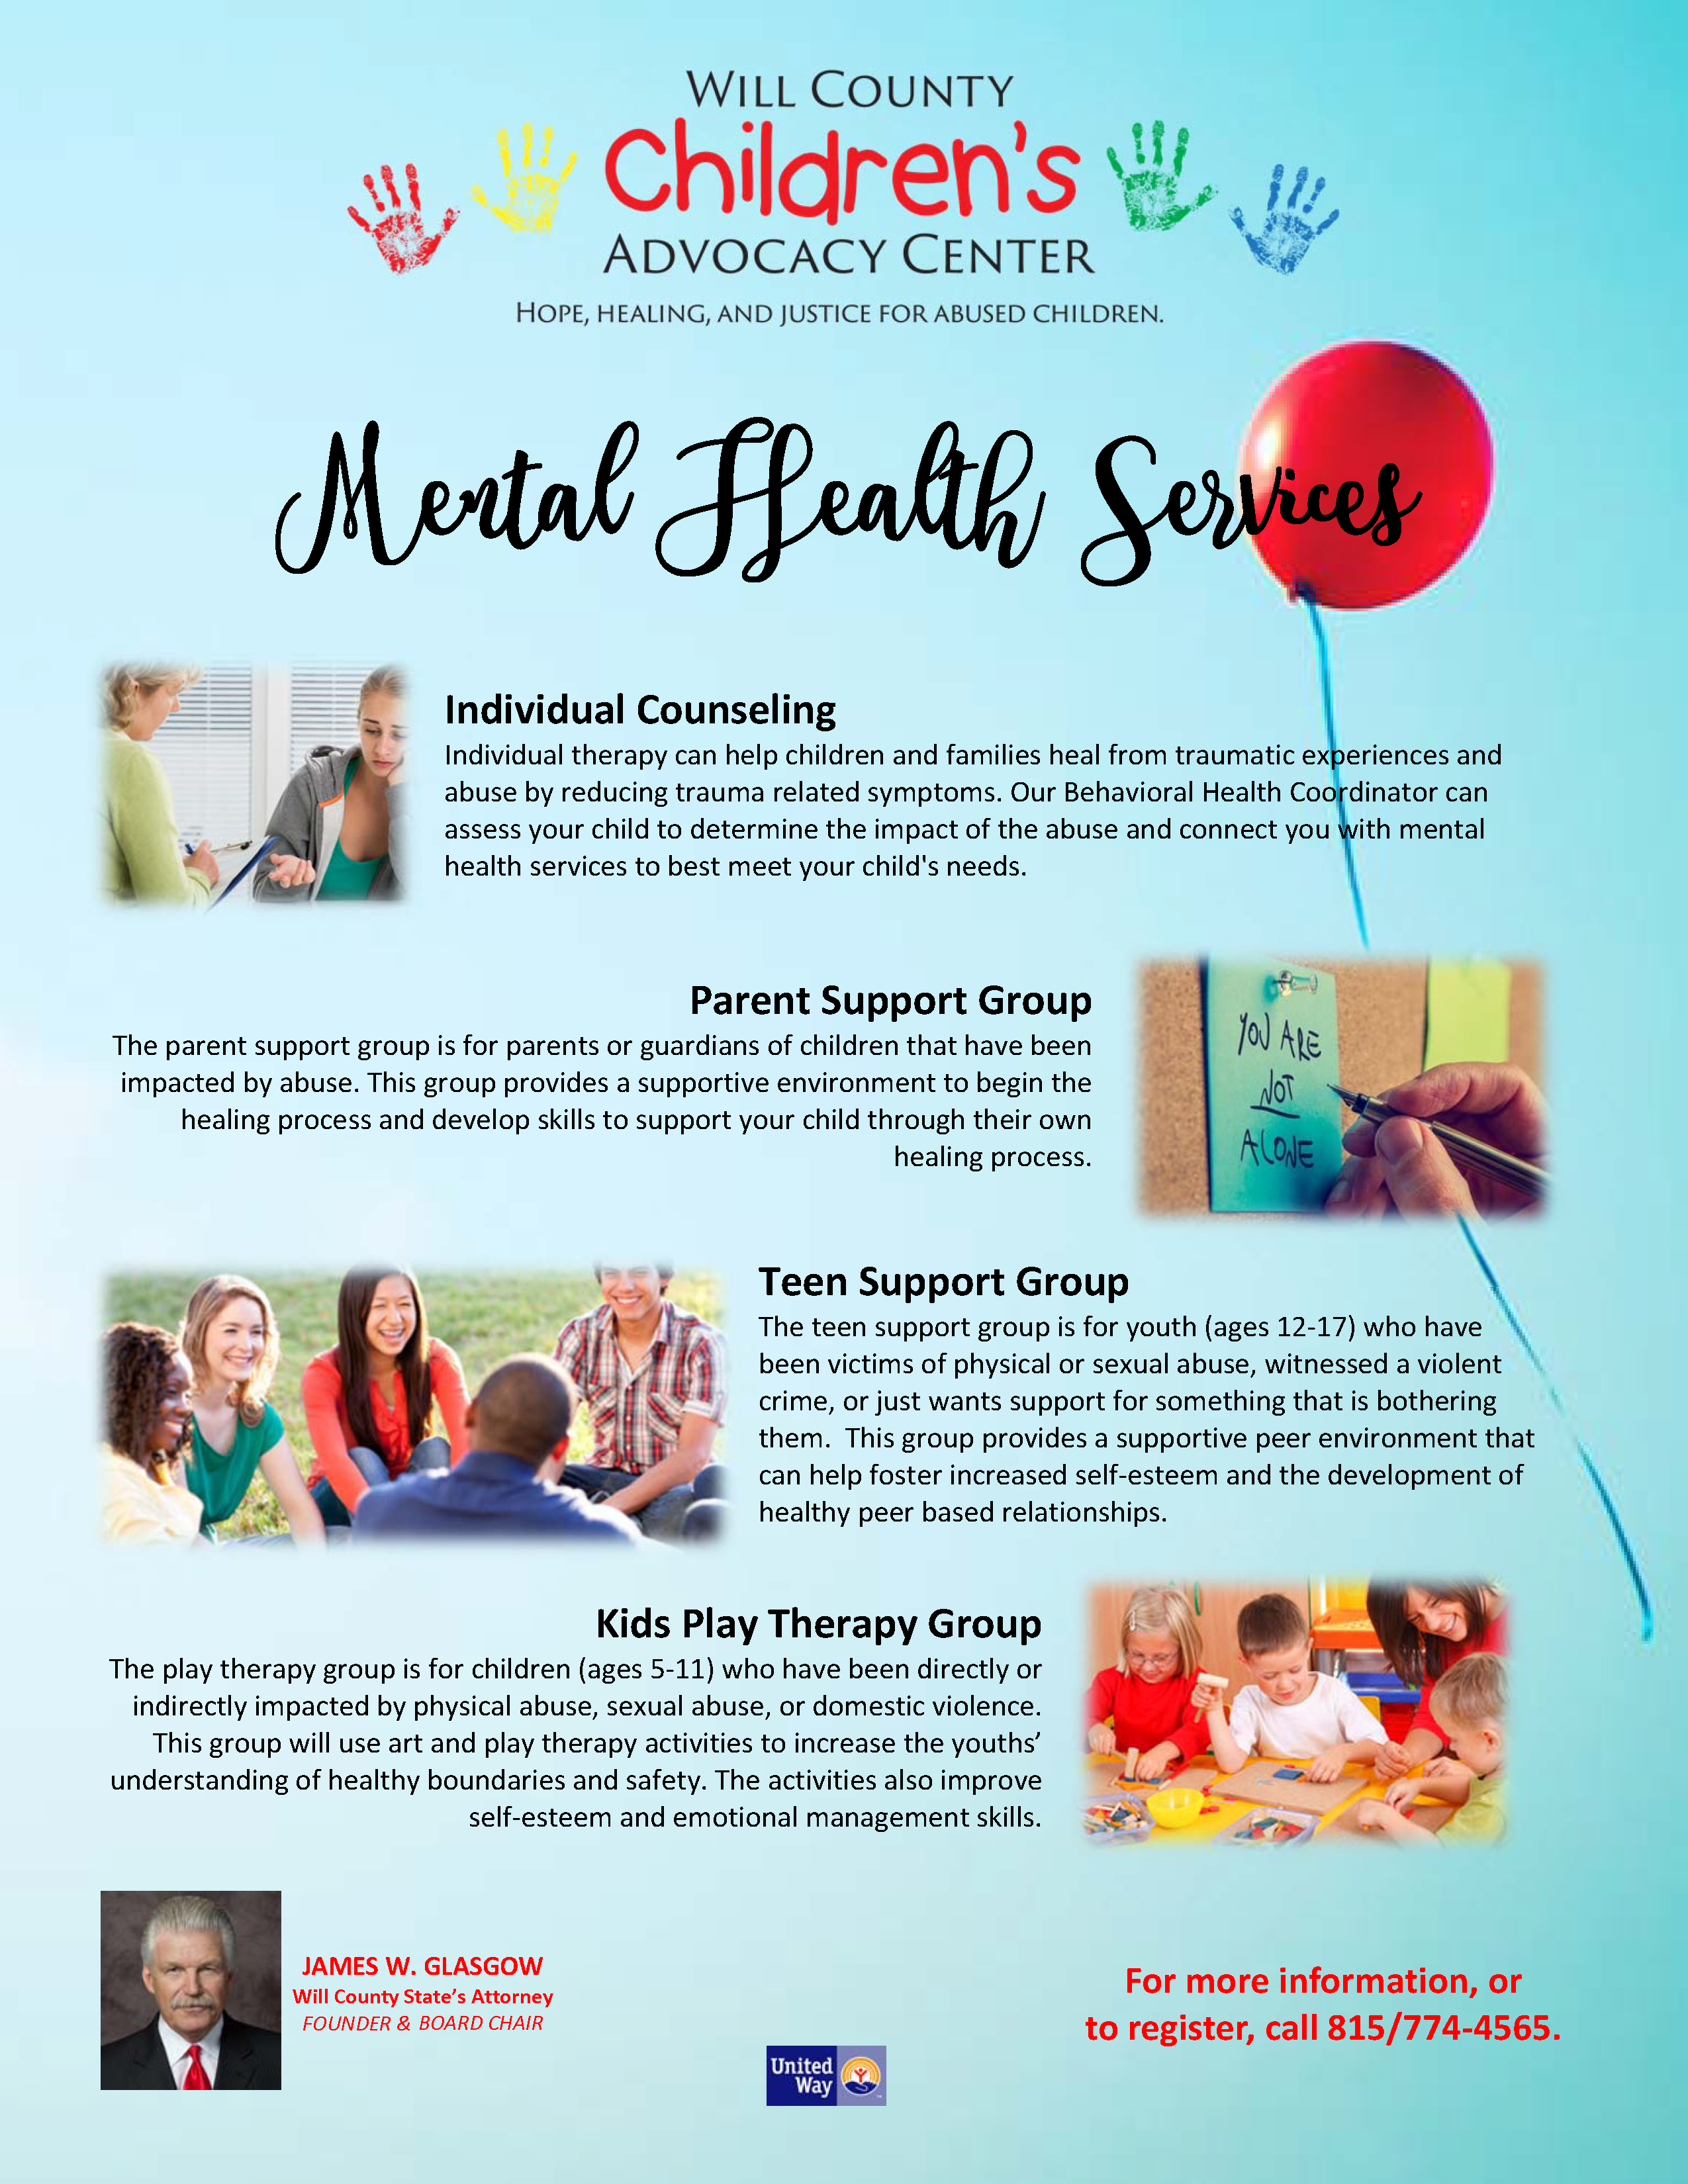 Trauma-Informed Mental Health Services – Will County Children's